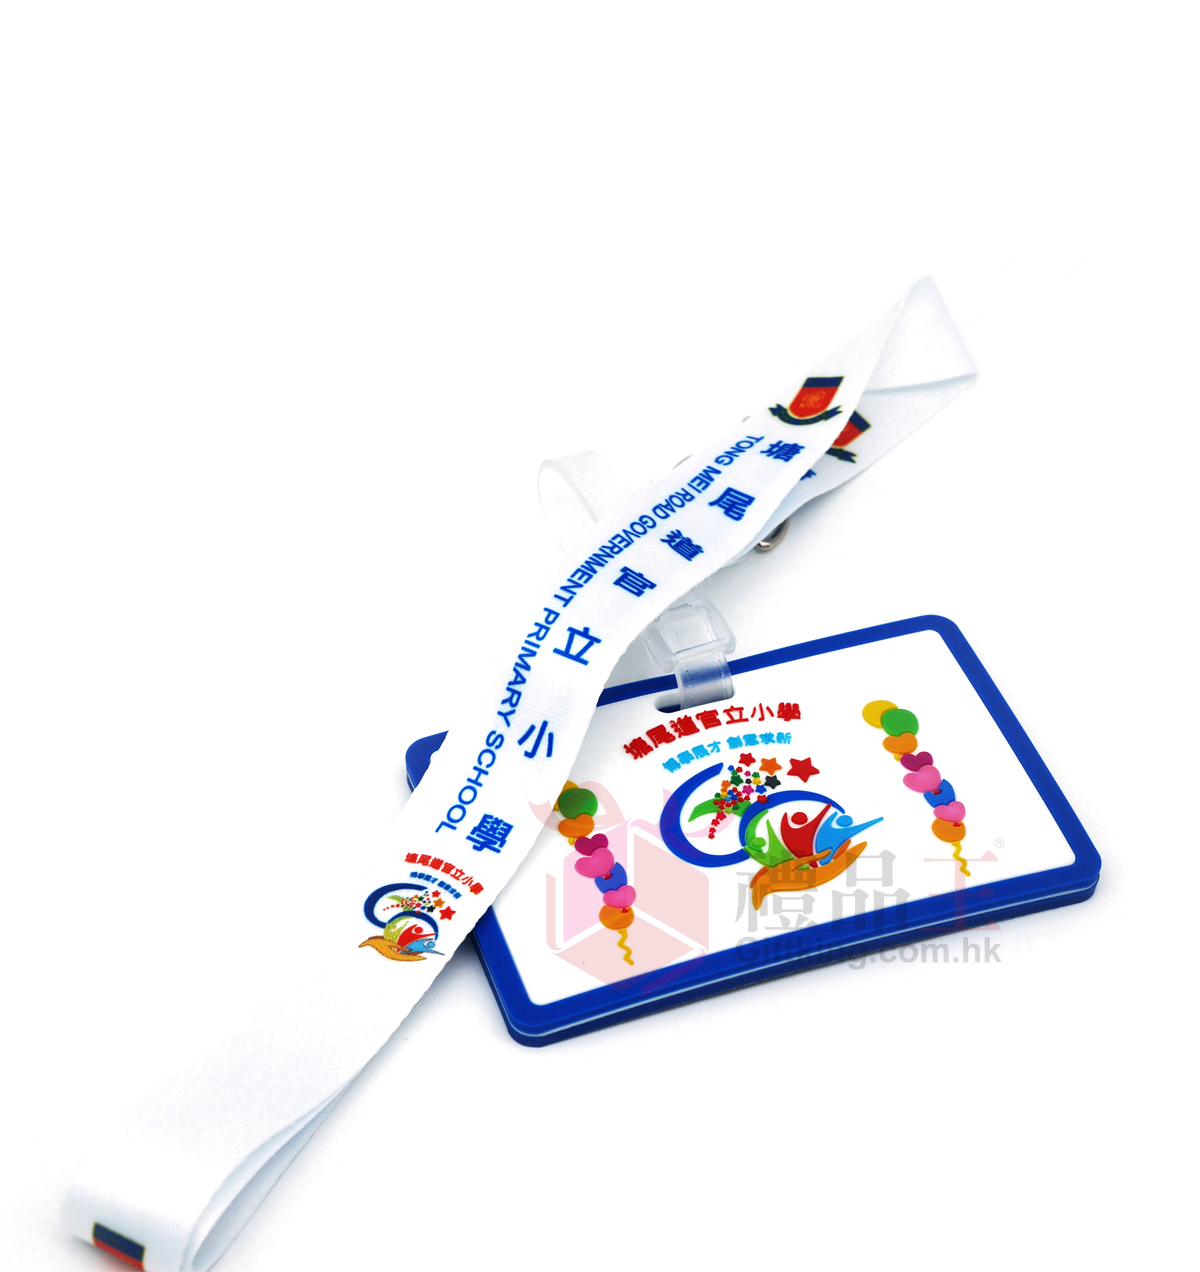 Tong Mei Road Government Primary School card holder + Hanging Rope (Advertising Gift)  